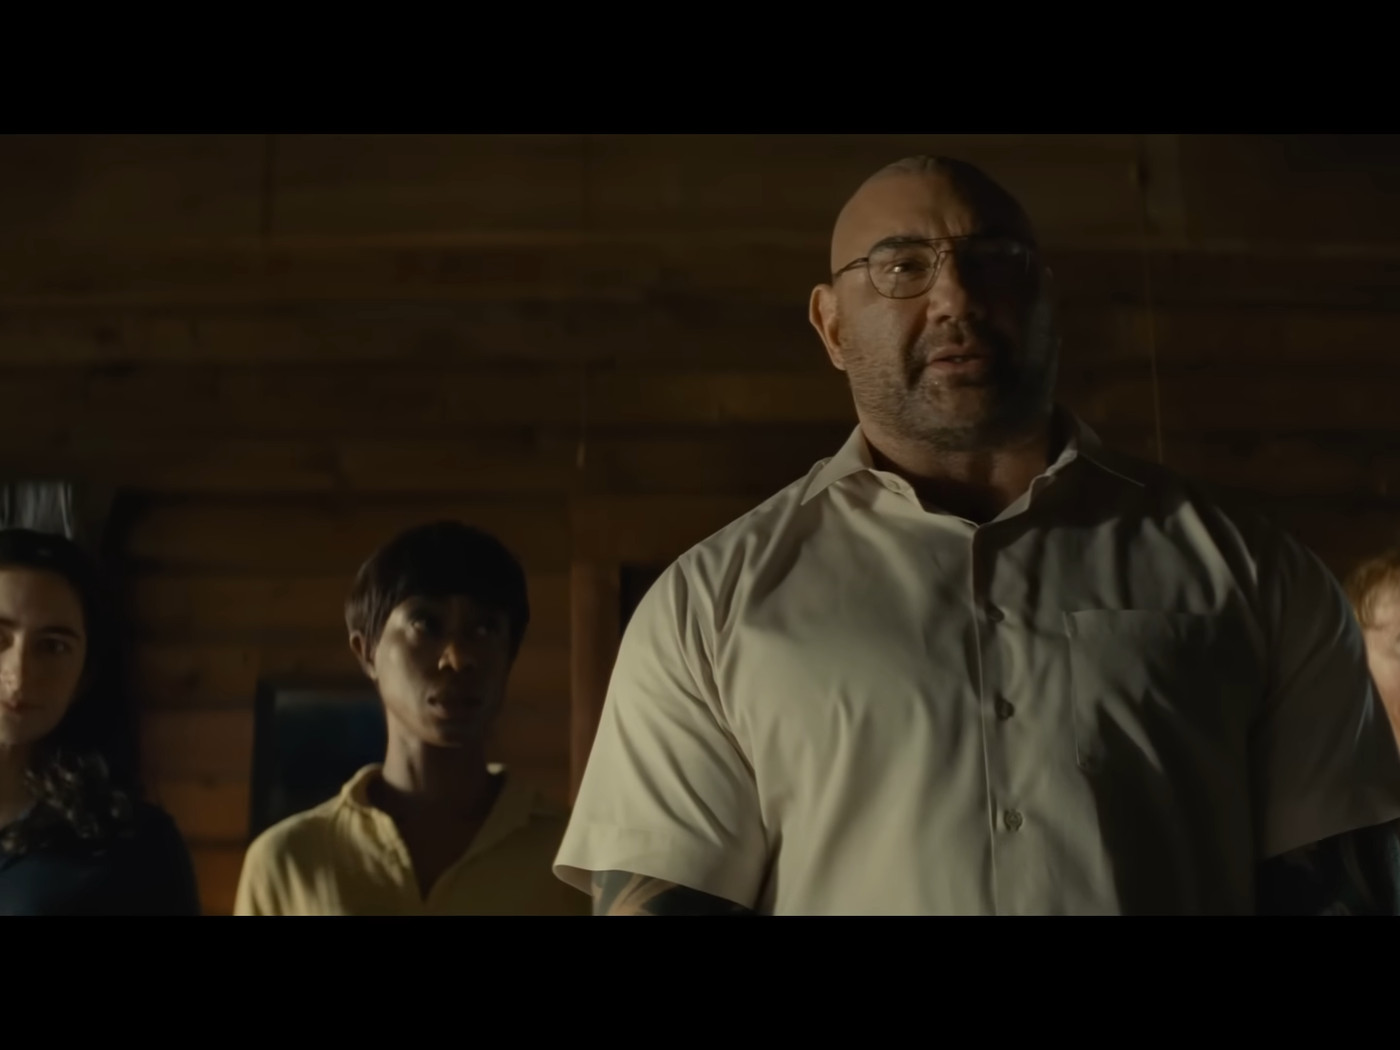 Knock at the Cabin trailer: M. Night Shyamalan brings on the apocalypse